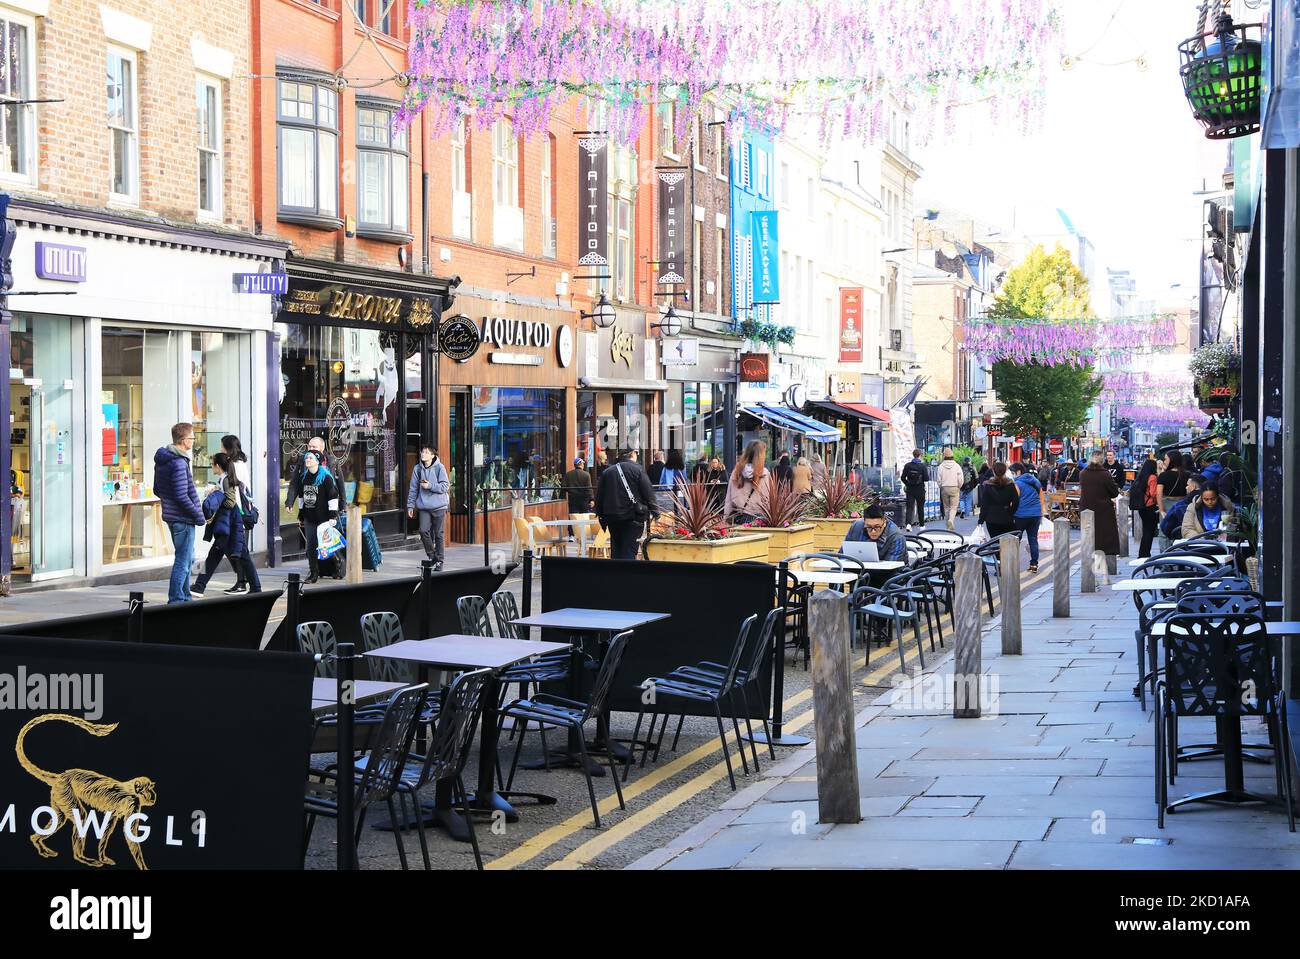 Cobbled Bold Street in the Ropewalks area of central Liverpool, now full of independent shops, trendy cafes and multicultural restaurants, in autumn sunshine, UK Stock Photo